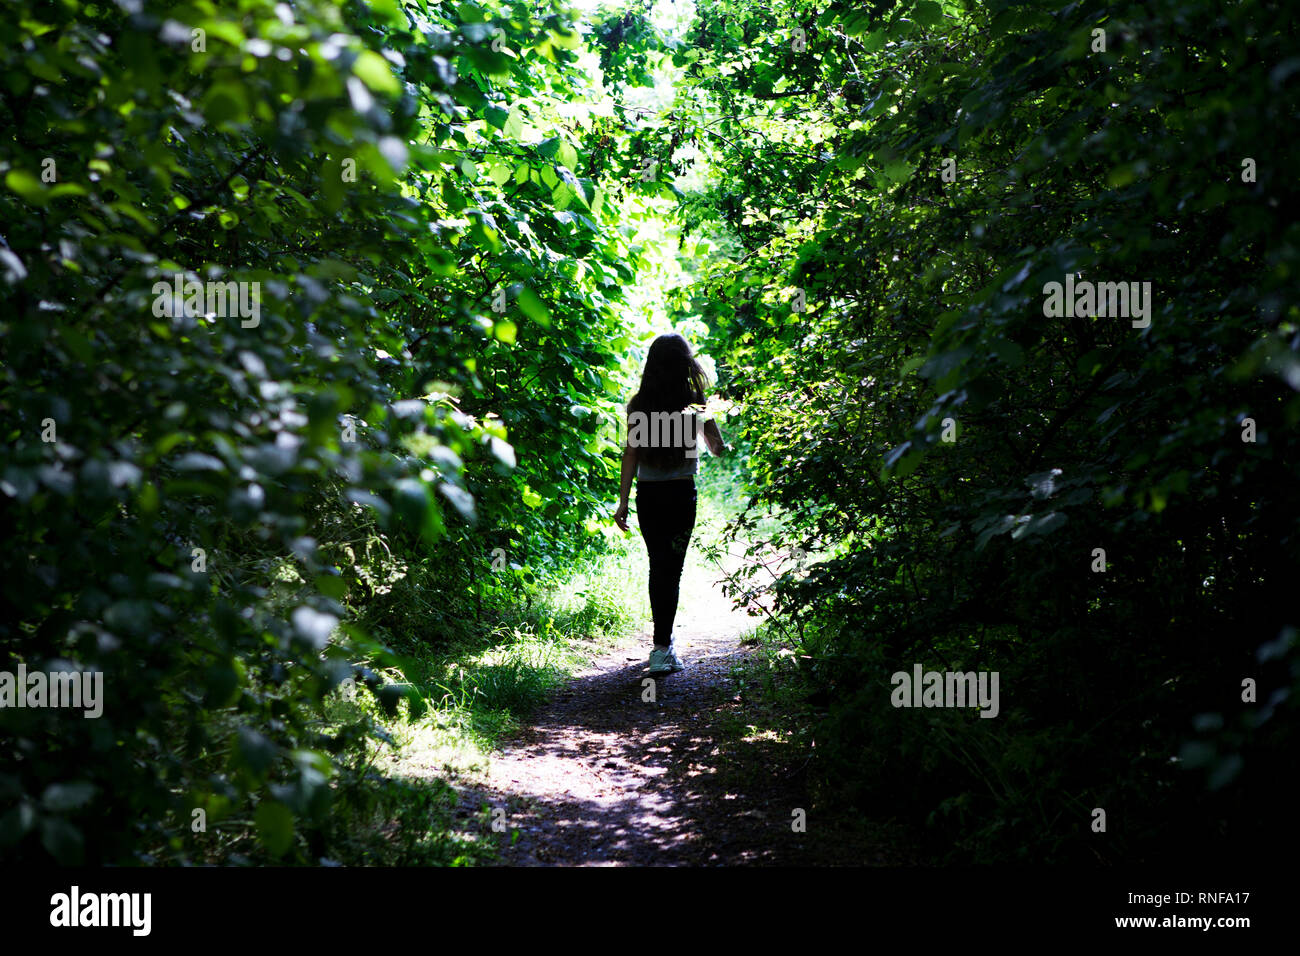 A young girl (age 8) walks along a leafy and sunlit woodland footpath away from the camera Stock Photo